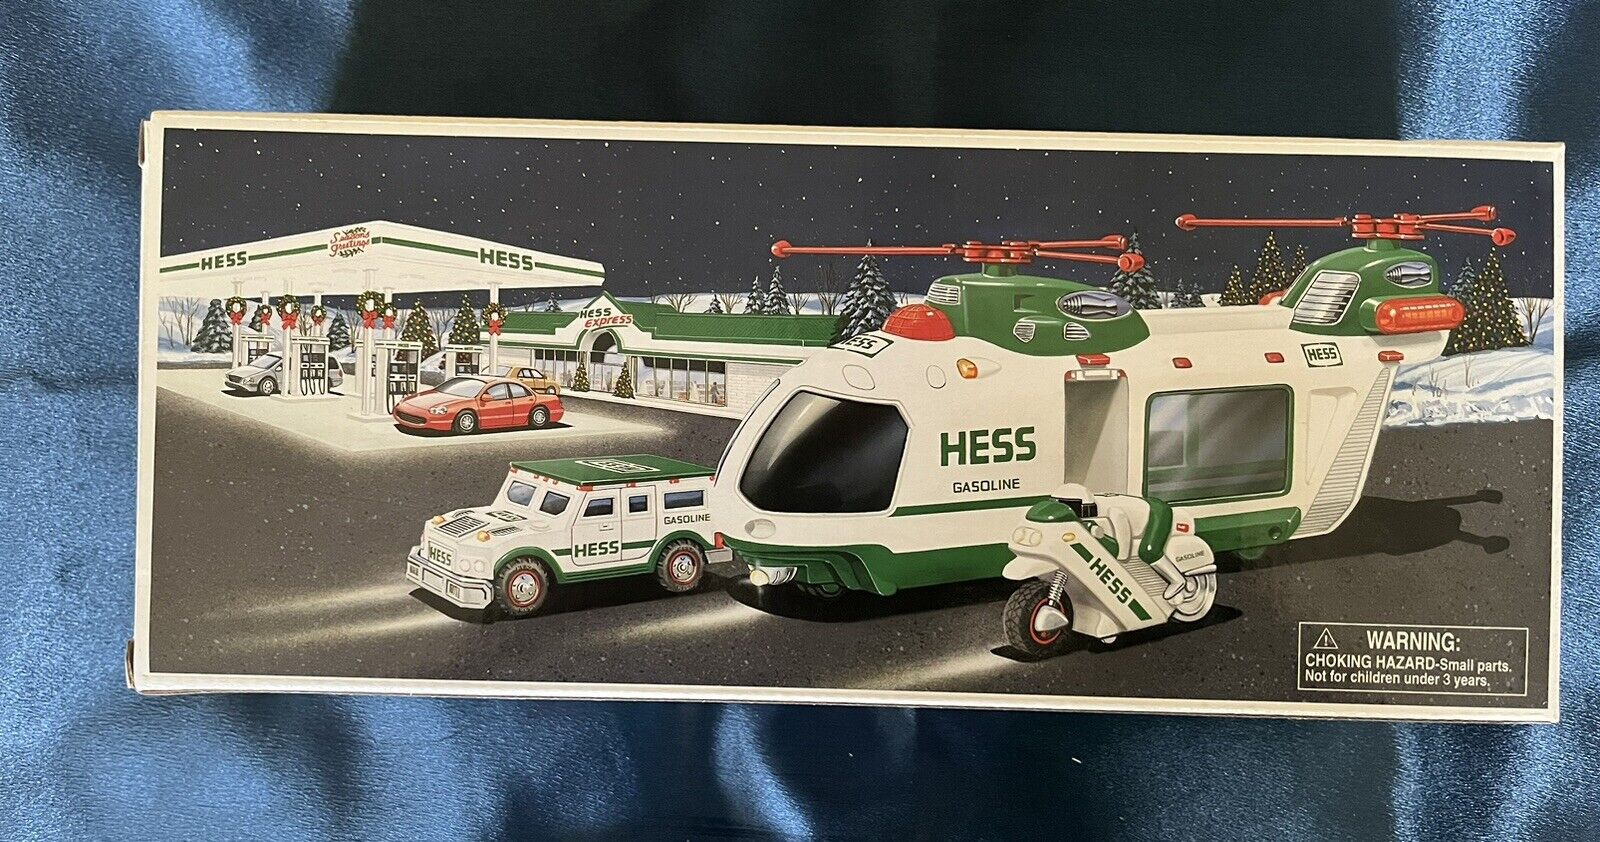 2001 Hess Truck, Helicopter With Motorcycle And Cruiser 🏁 Never Been Out Of Box